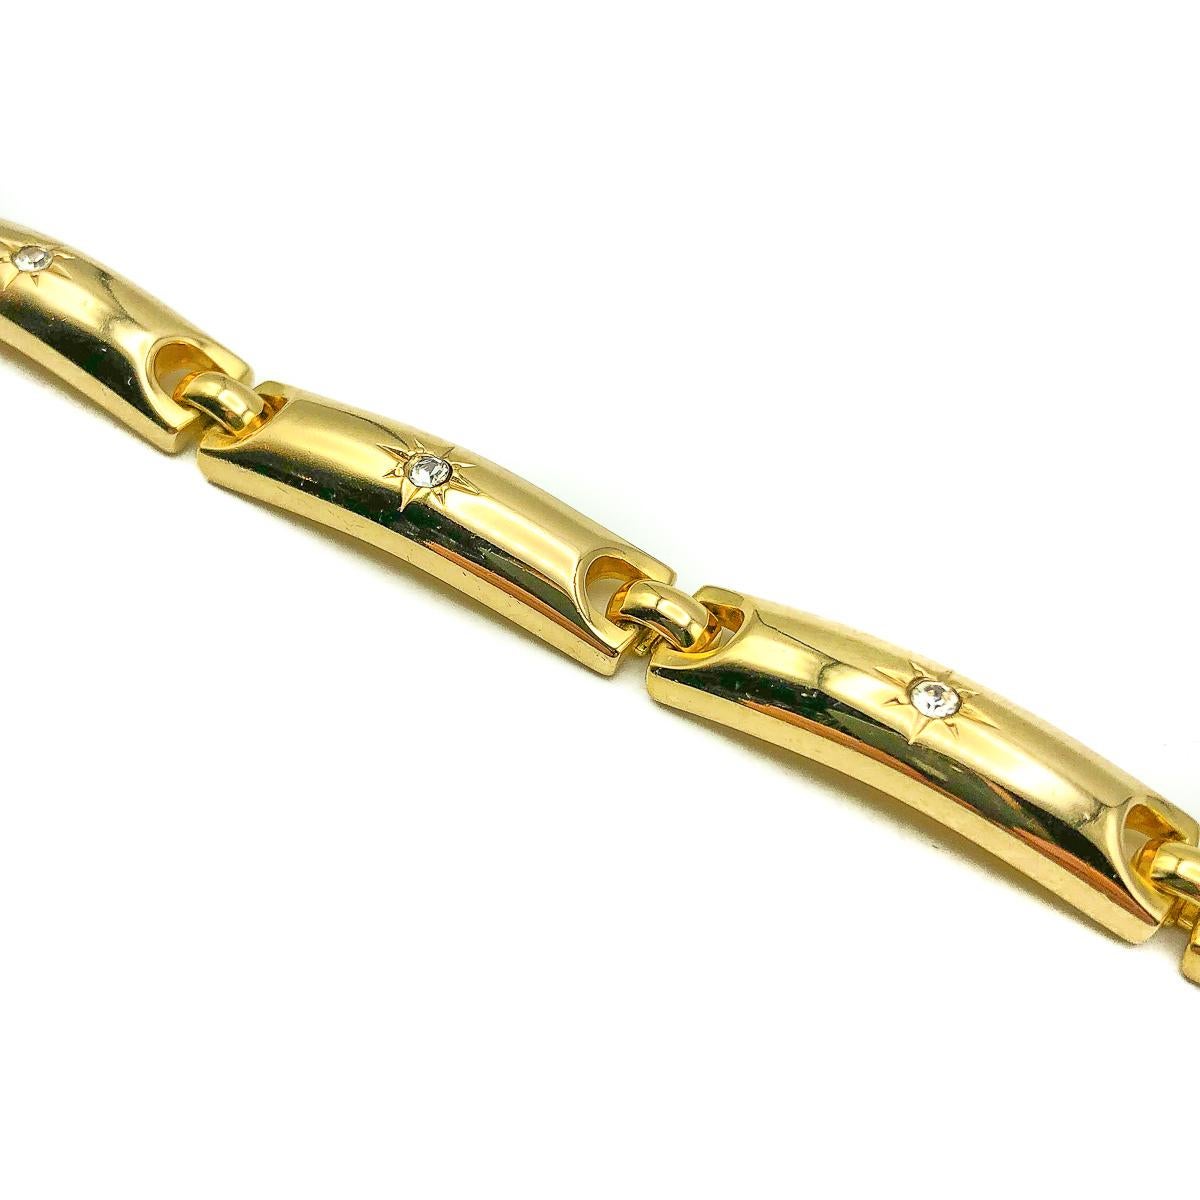 A divine Vintage Dior Gold Stars Bracelet. Weighty and beautifully made. Crafted in gold plated metal with each of the five sections finished with a crystal in a star motif. The star symbolising Christian Dior's lucky talisman to which he believed